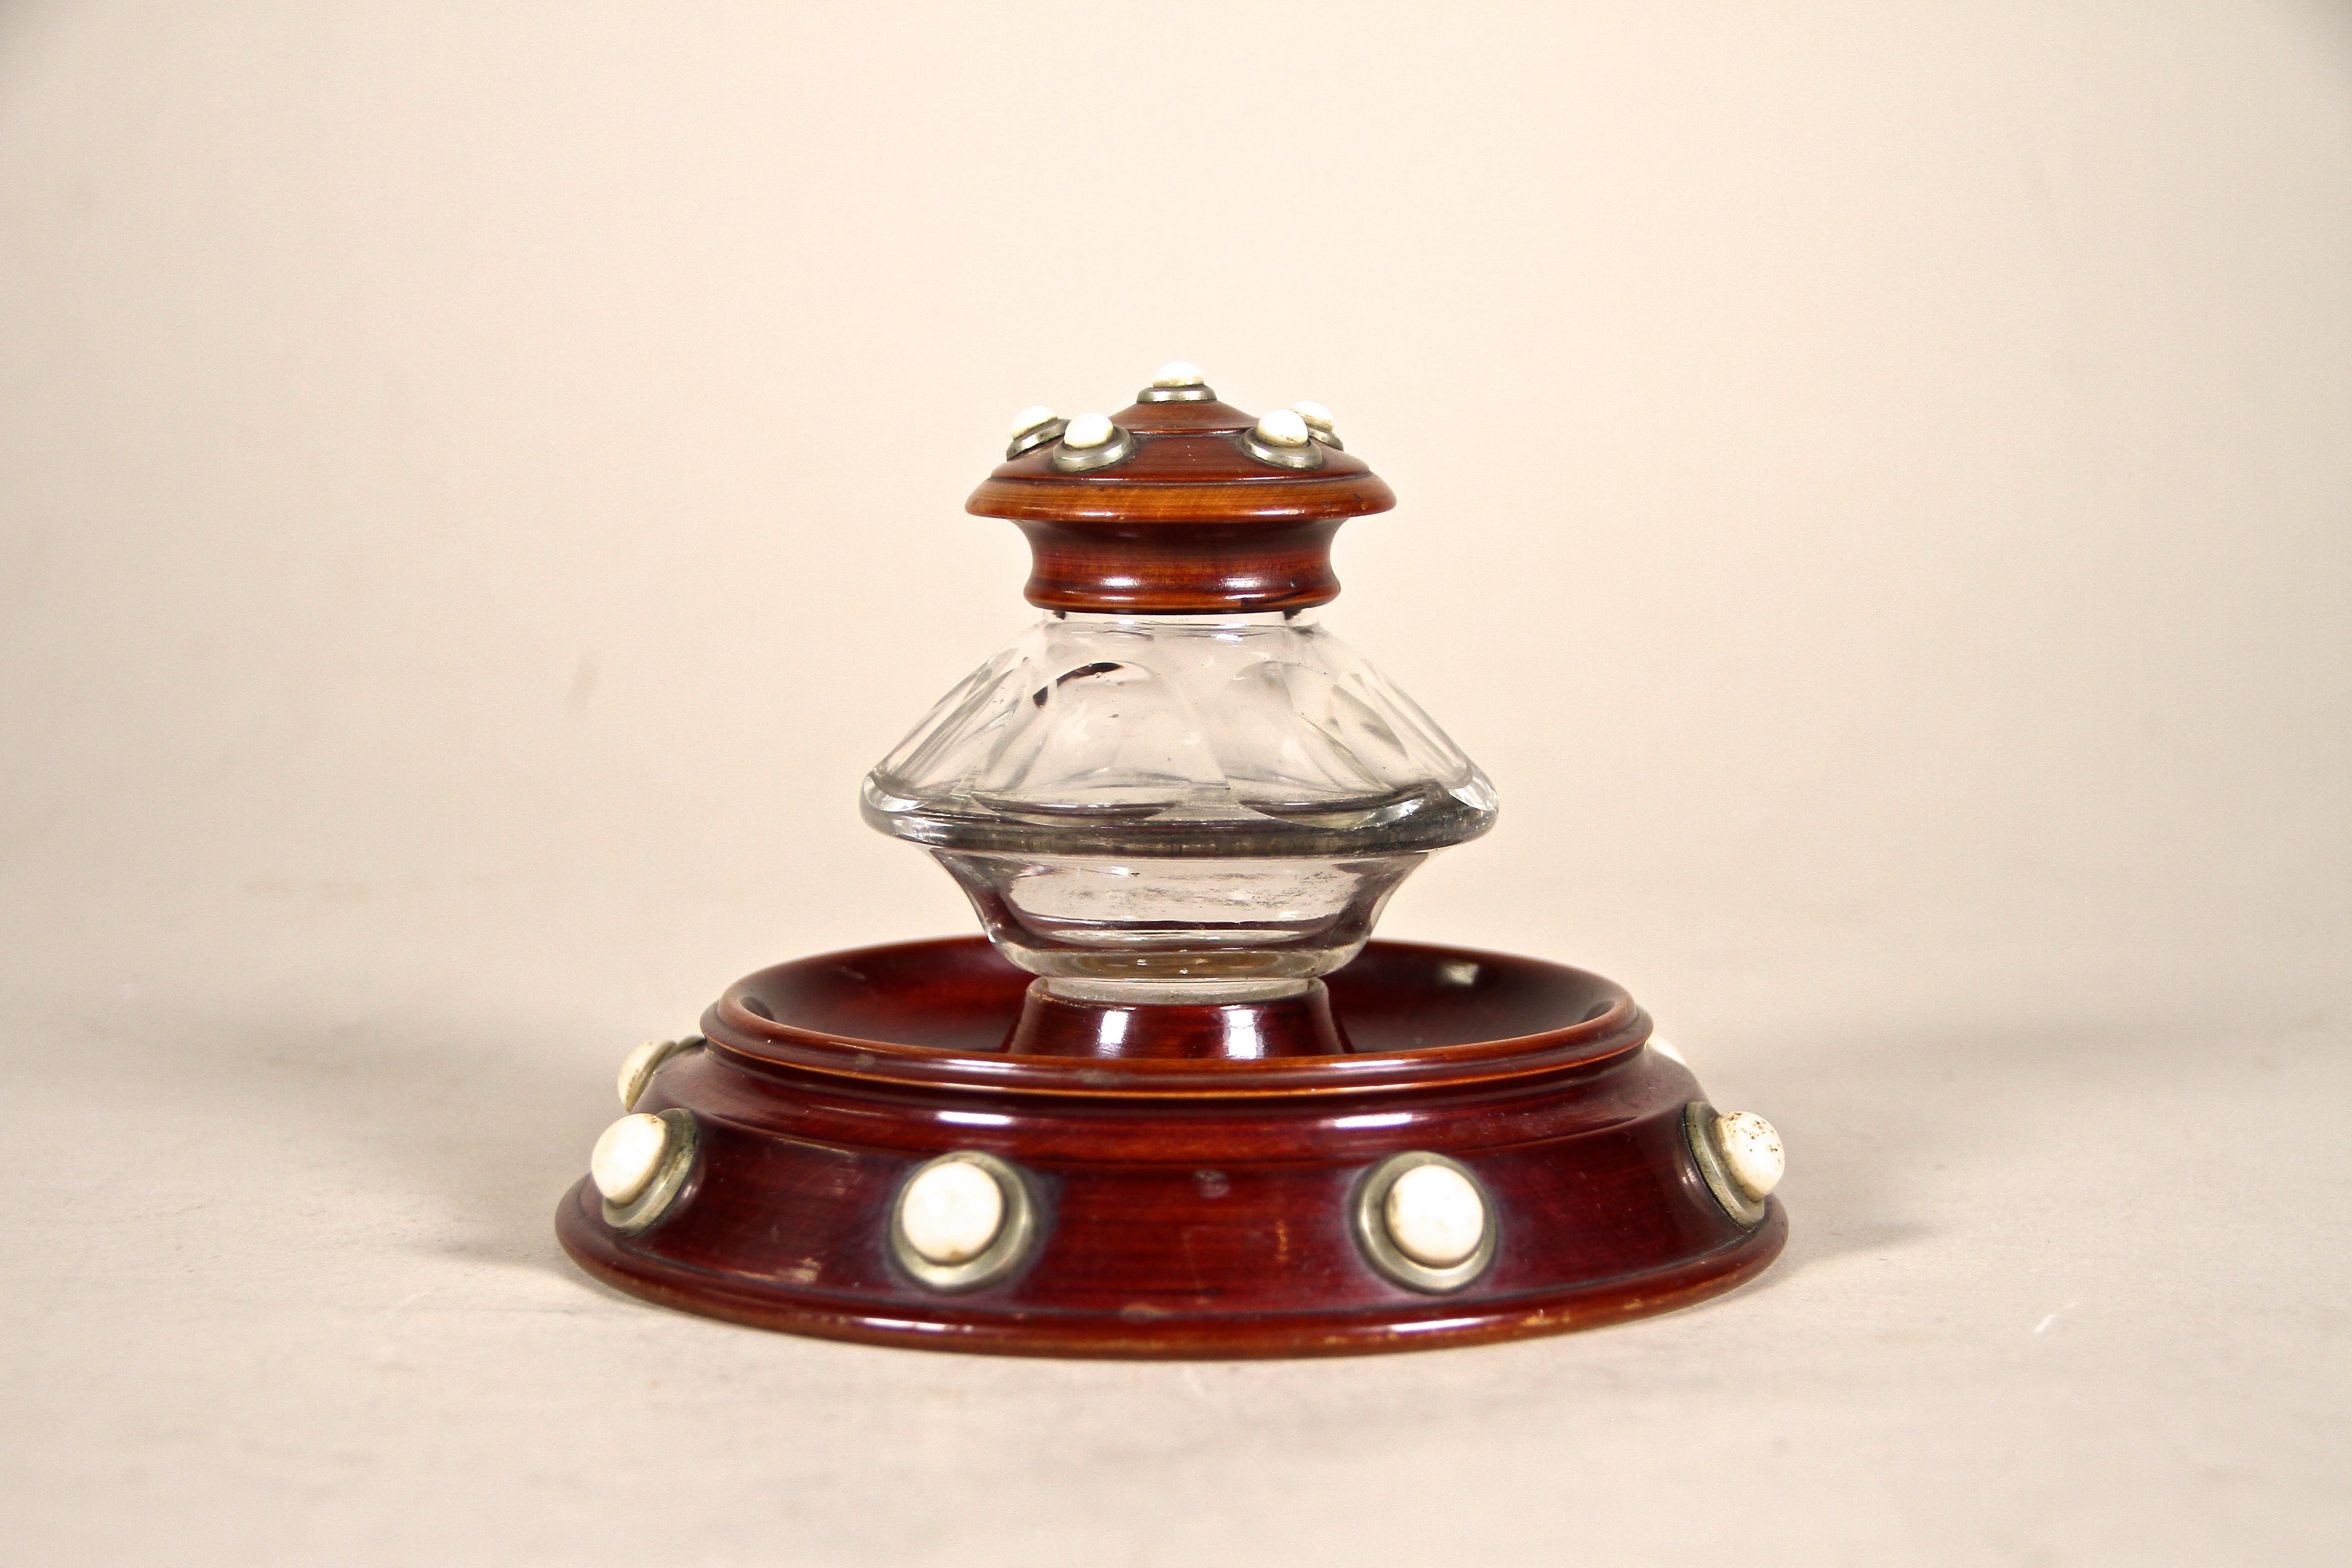 Out of the ordinary wooden Art Nouveau Inkwell from around 1900 in Austria. Artfully carved out of beechwood and trimmed to a nice mahogany look, this unusual round inkwell shows a fantastic design adorned by brass rosettes with porcelain knobs on